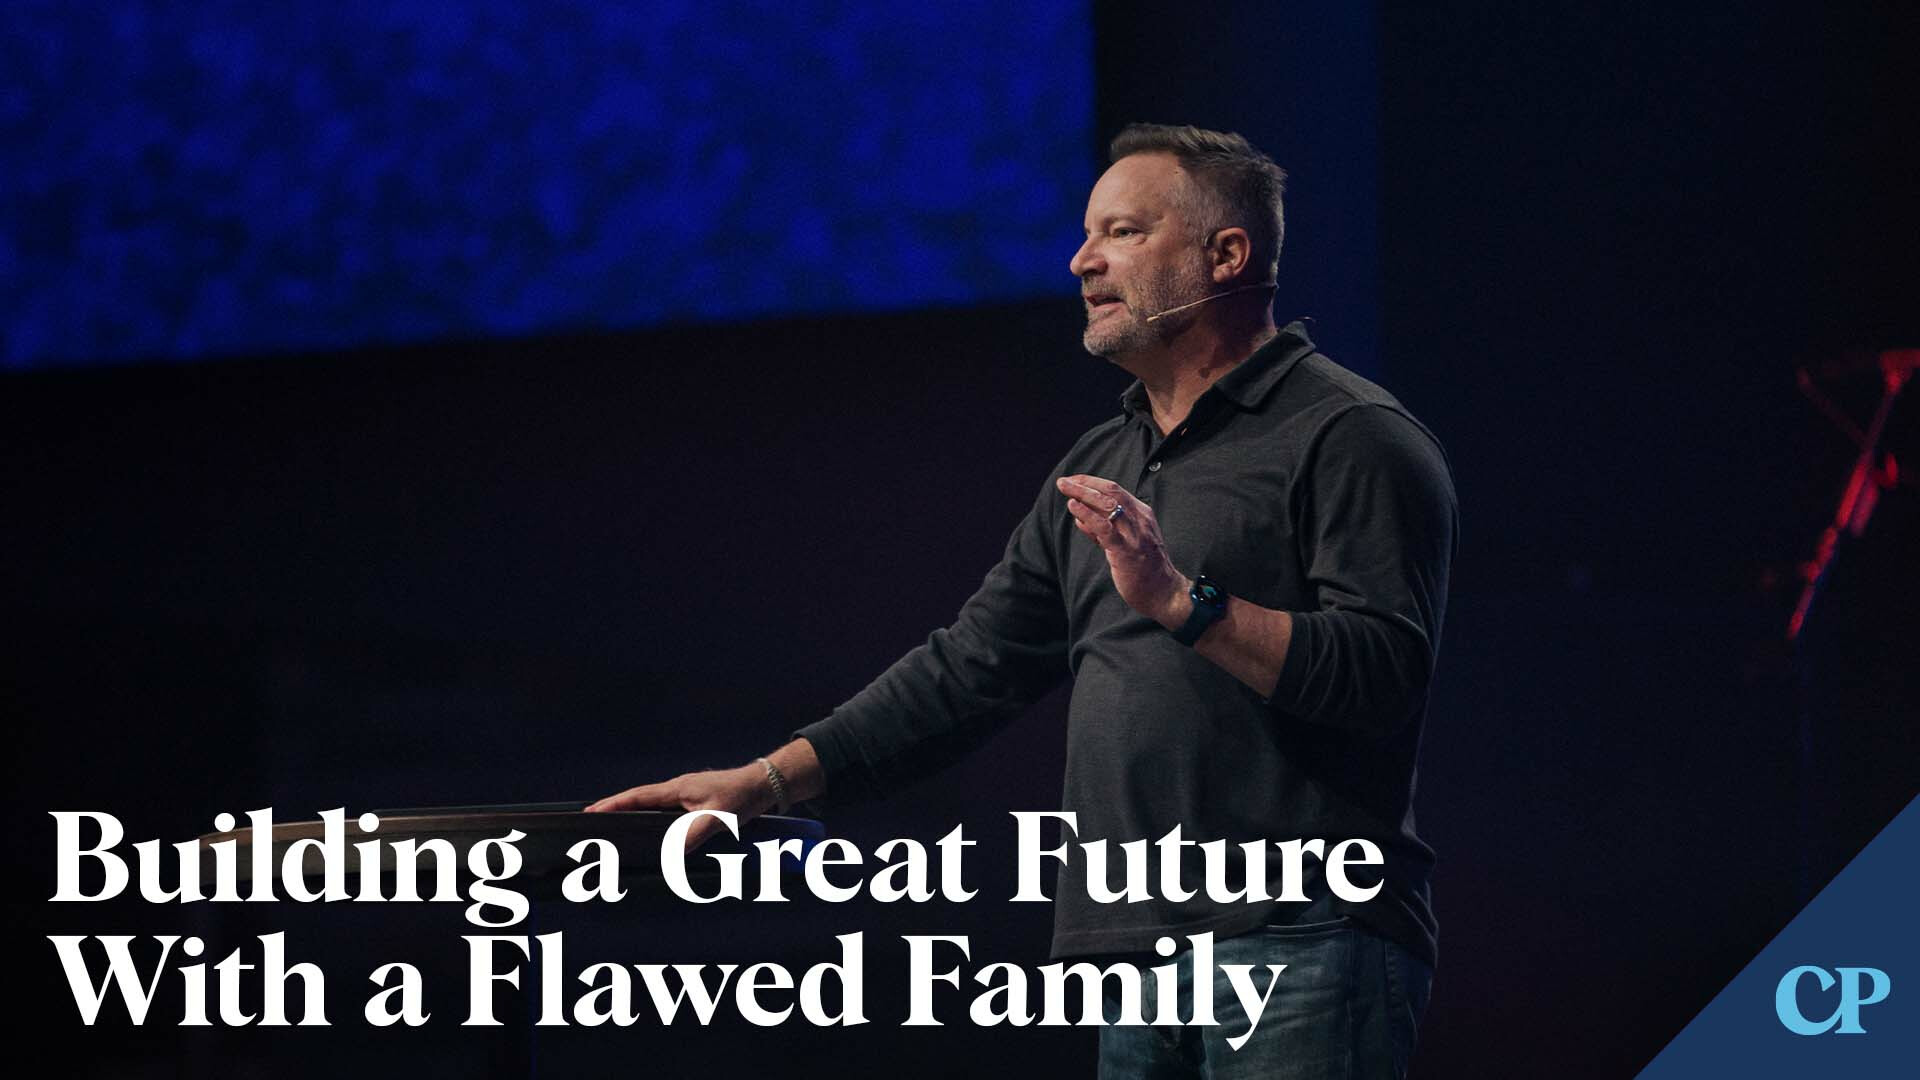 Building a Great Future with a Flawed Family